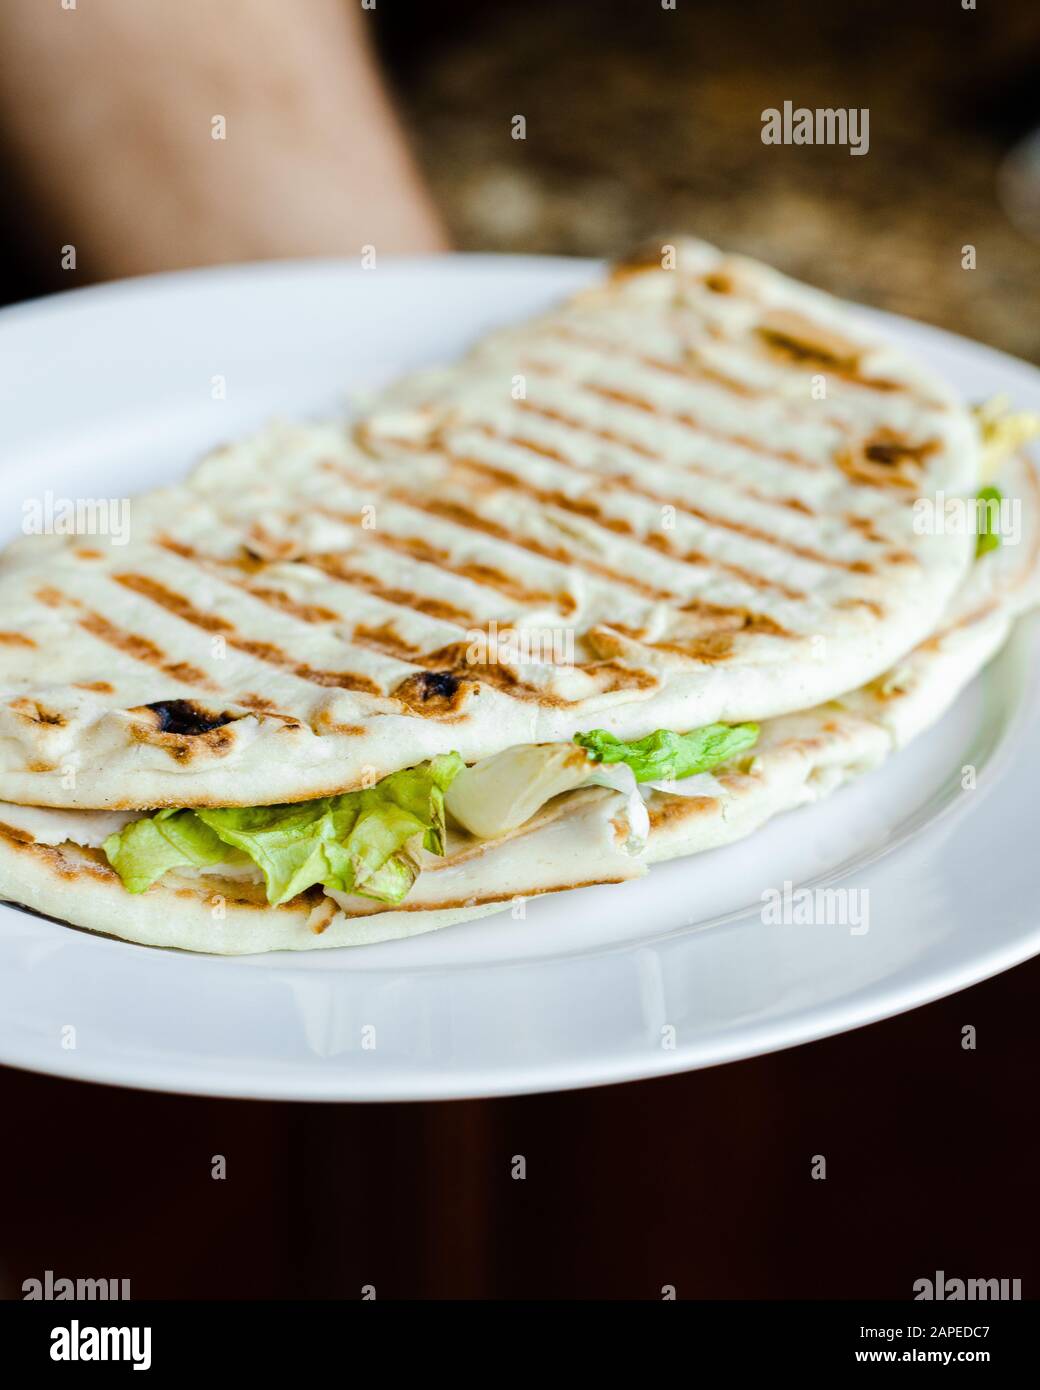 Panini grilled pita bread turkey swiss cheese lettuce sandwich on a white plate close up with a blurry background Stock Photo